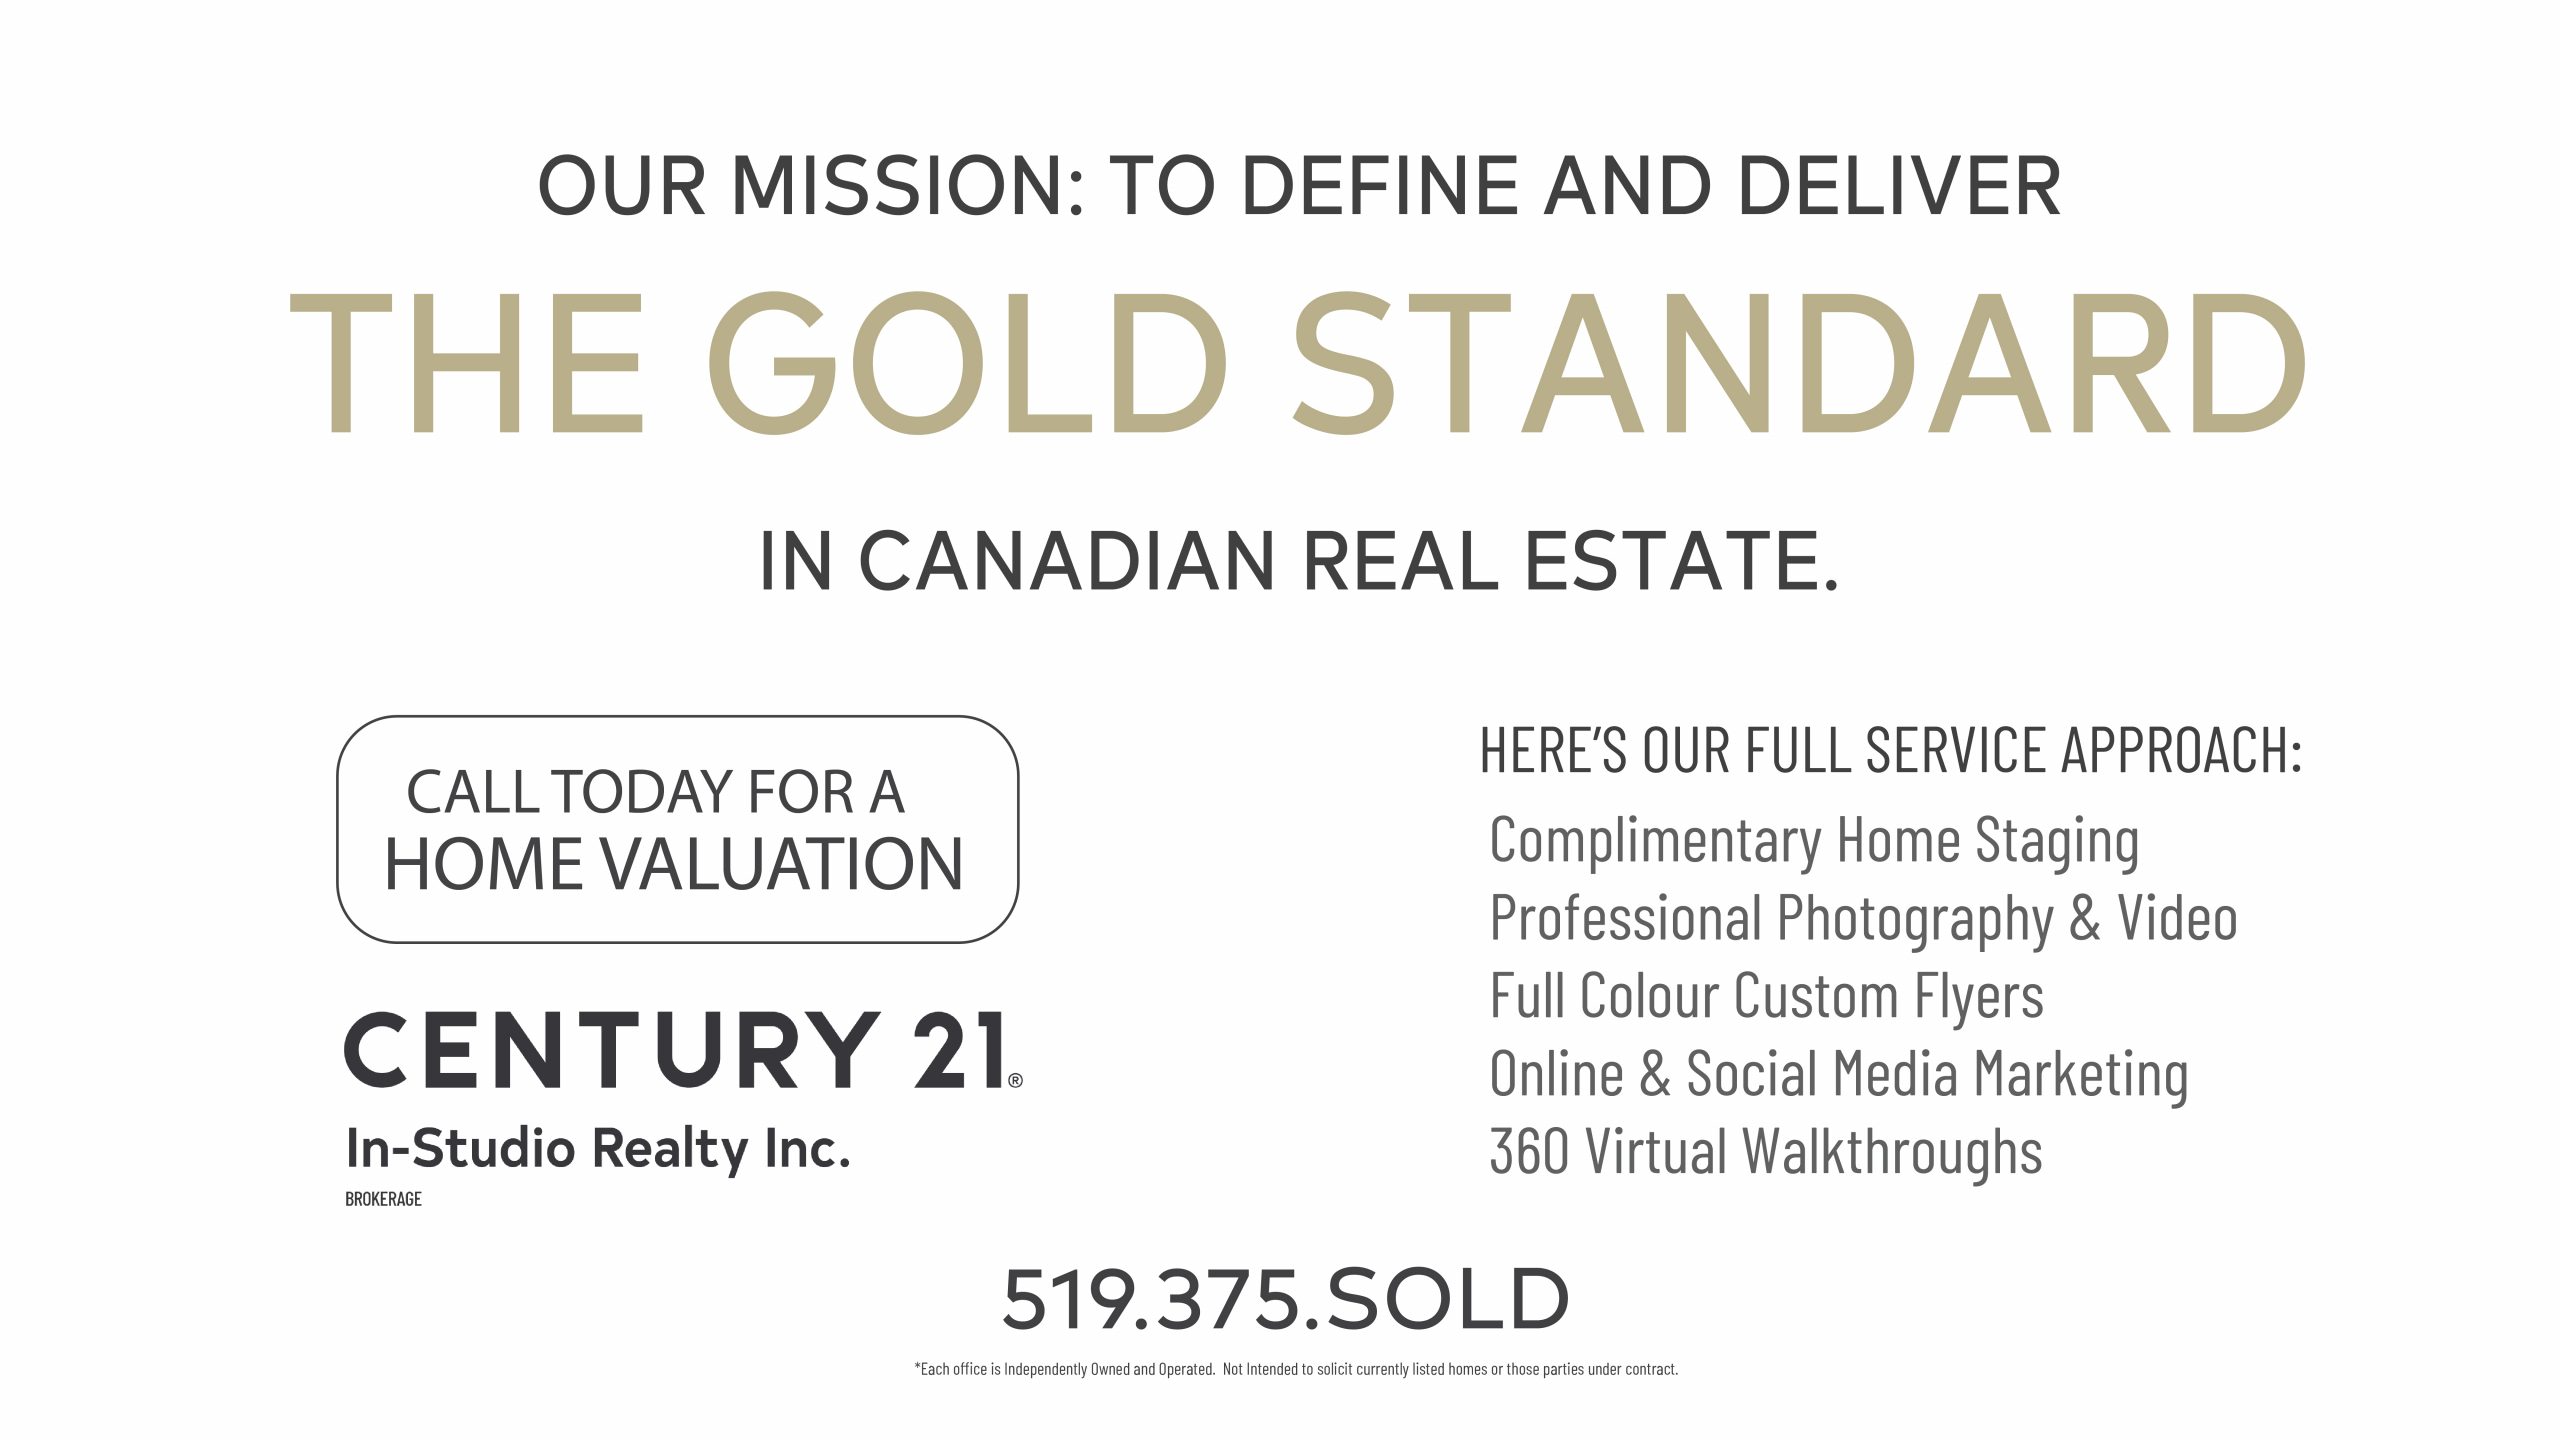 Grey Bruce Real Estate Services